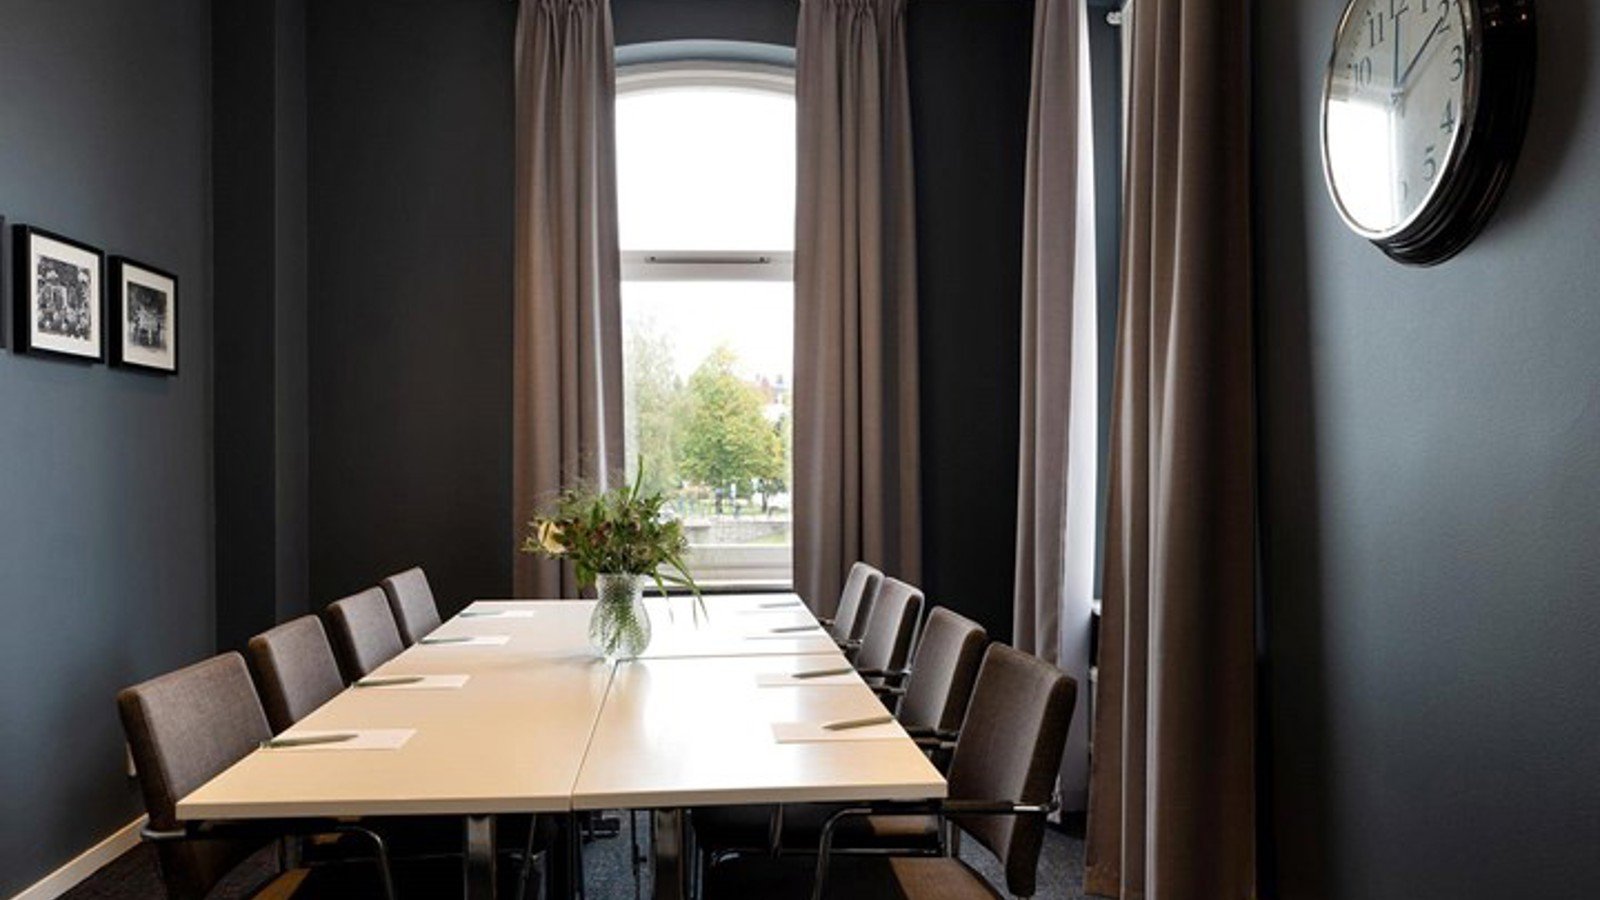 Boardroom with large windows, dark walls, white table with flower vase